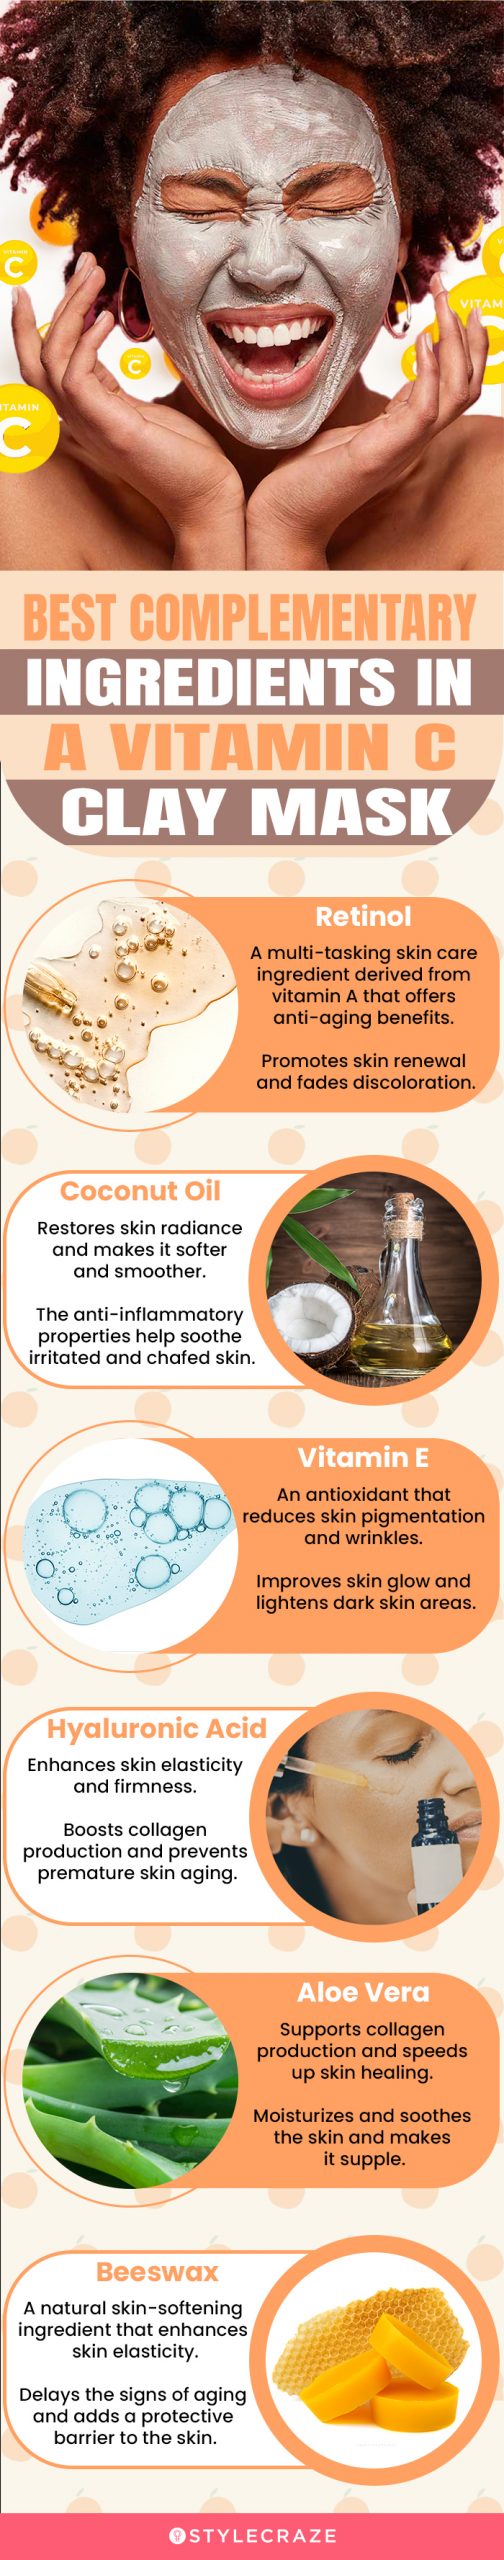 Best Complementary Ingredients In A Vitamin C Clay Mask(infographic)